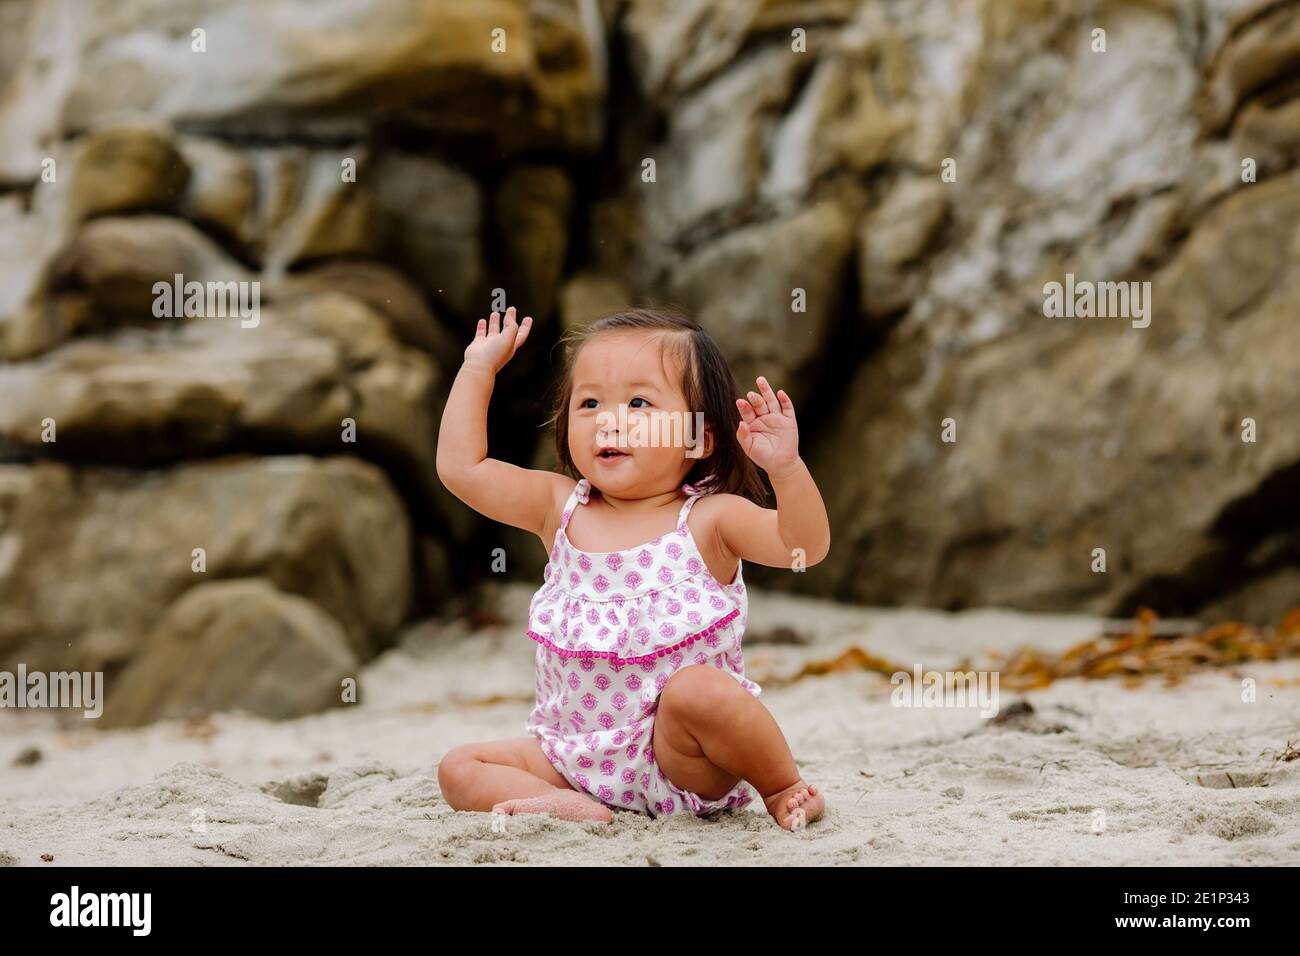 Happy young Asian child with raised arms sitting in sand near rocks Stock Photo